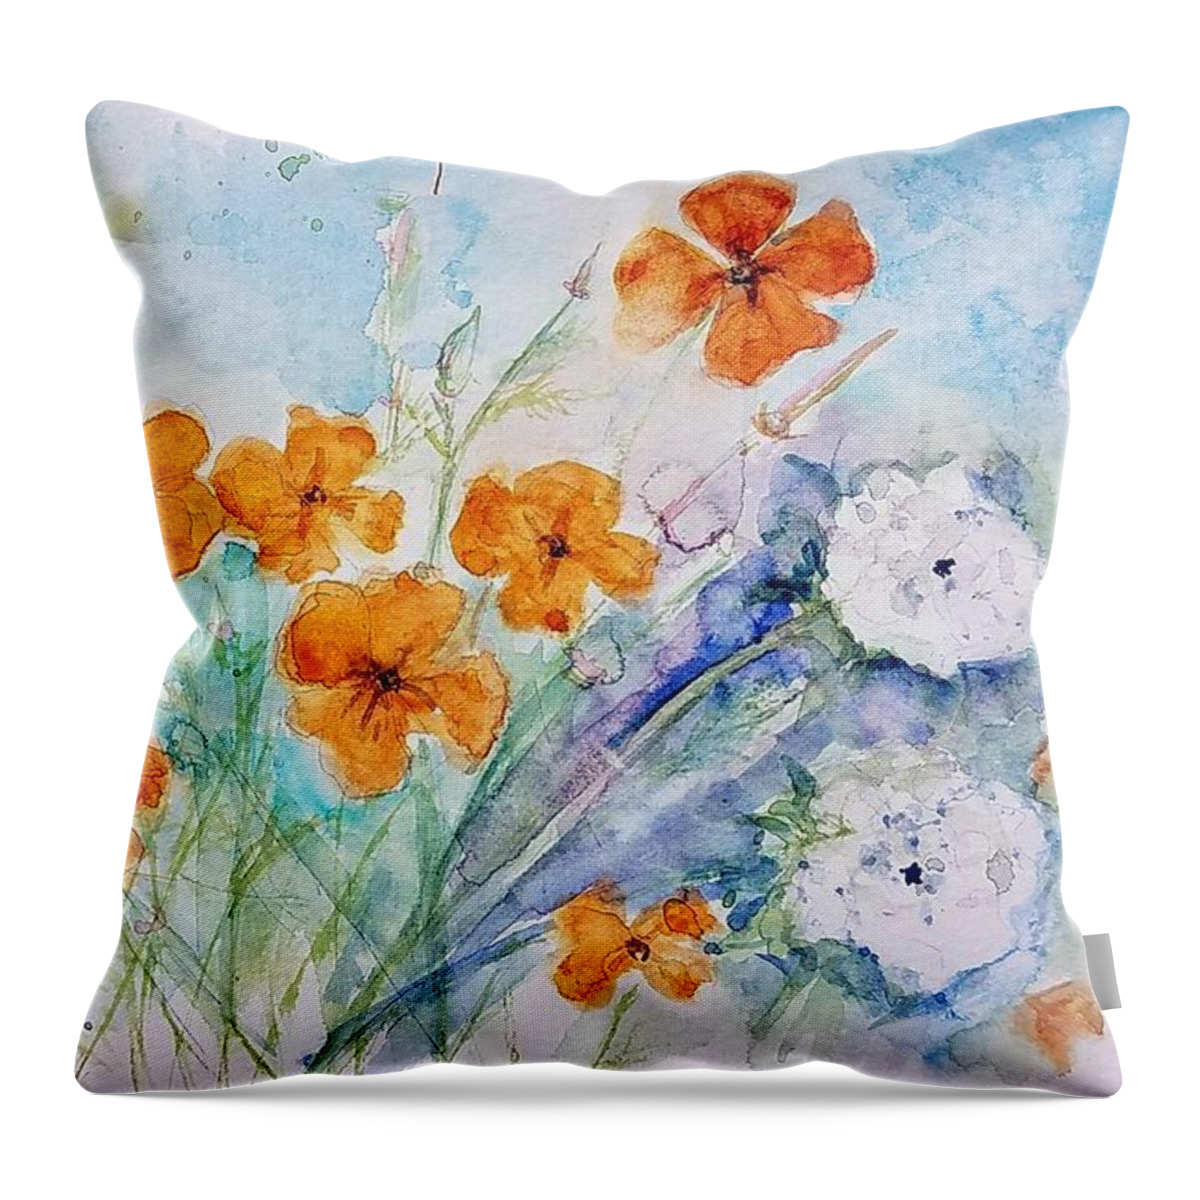 Queen Anne's Lace And Poppies Throw Pillow featuring the painting Queen Anne's Lace by Anna Jacke